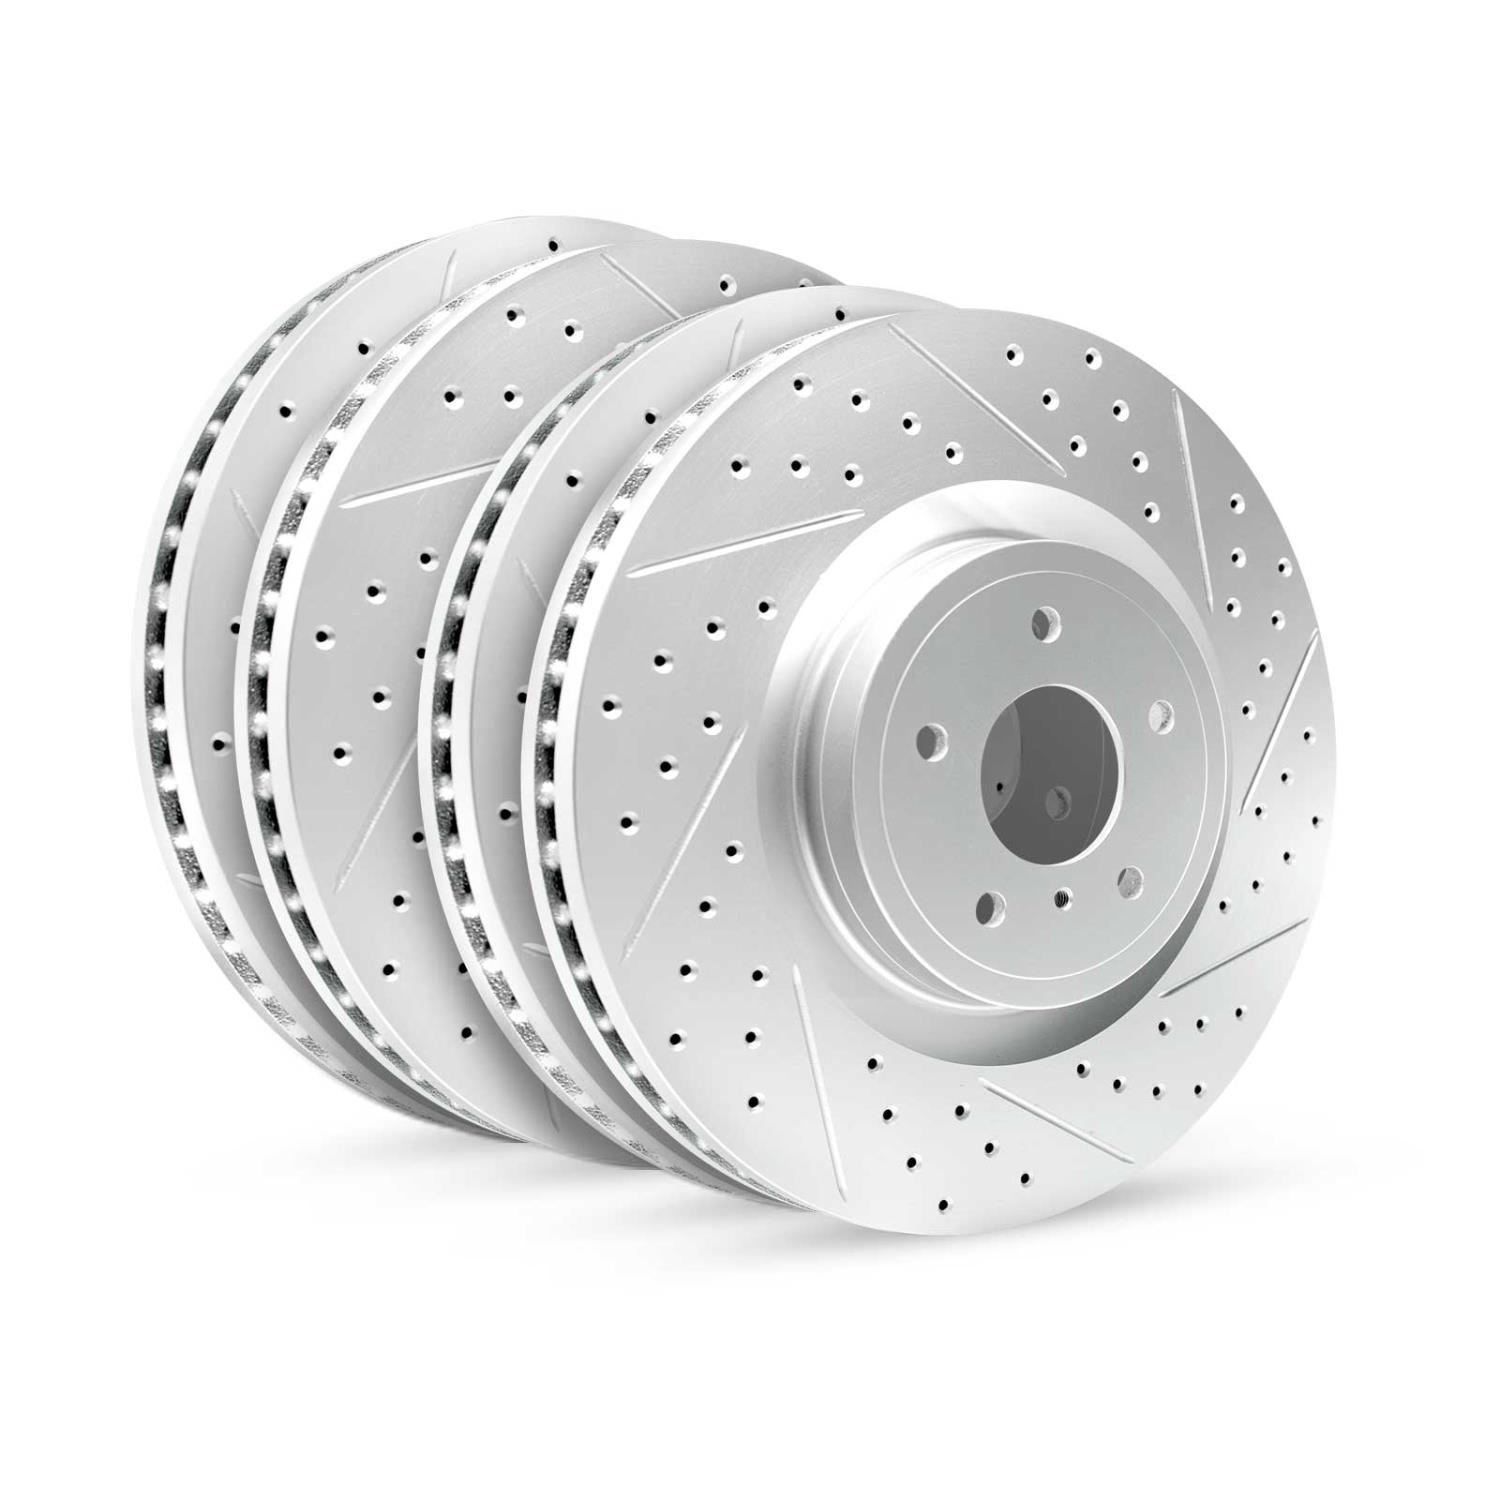 GEO-Carbon Drilled/Slotted Rotors, 1999-2001 Infiniti/Nissan,